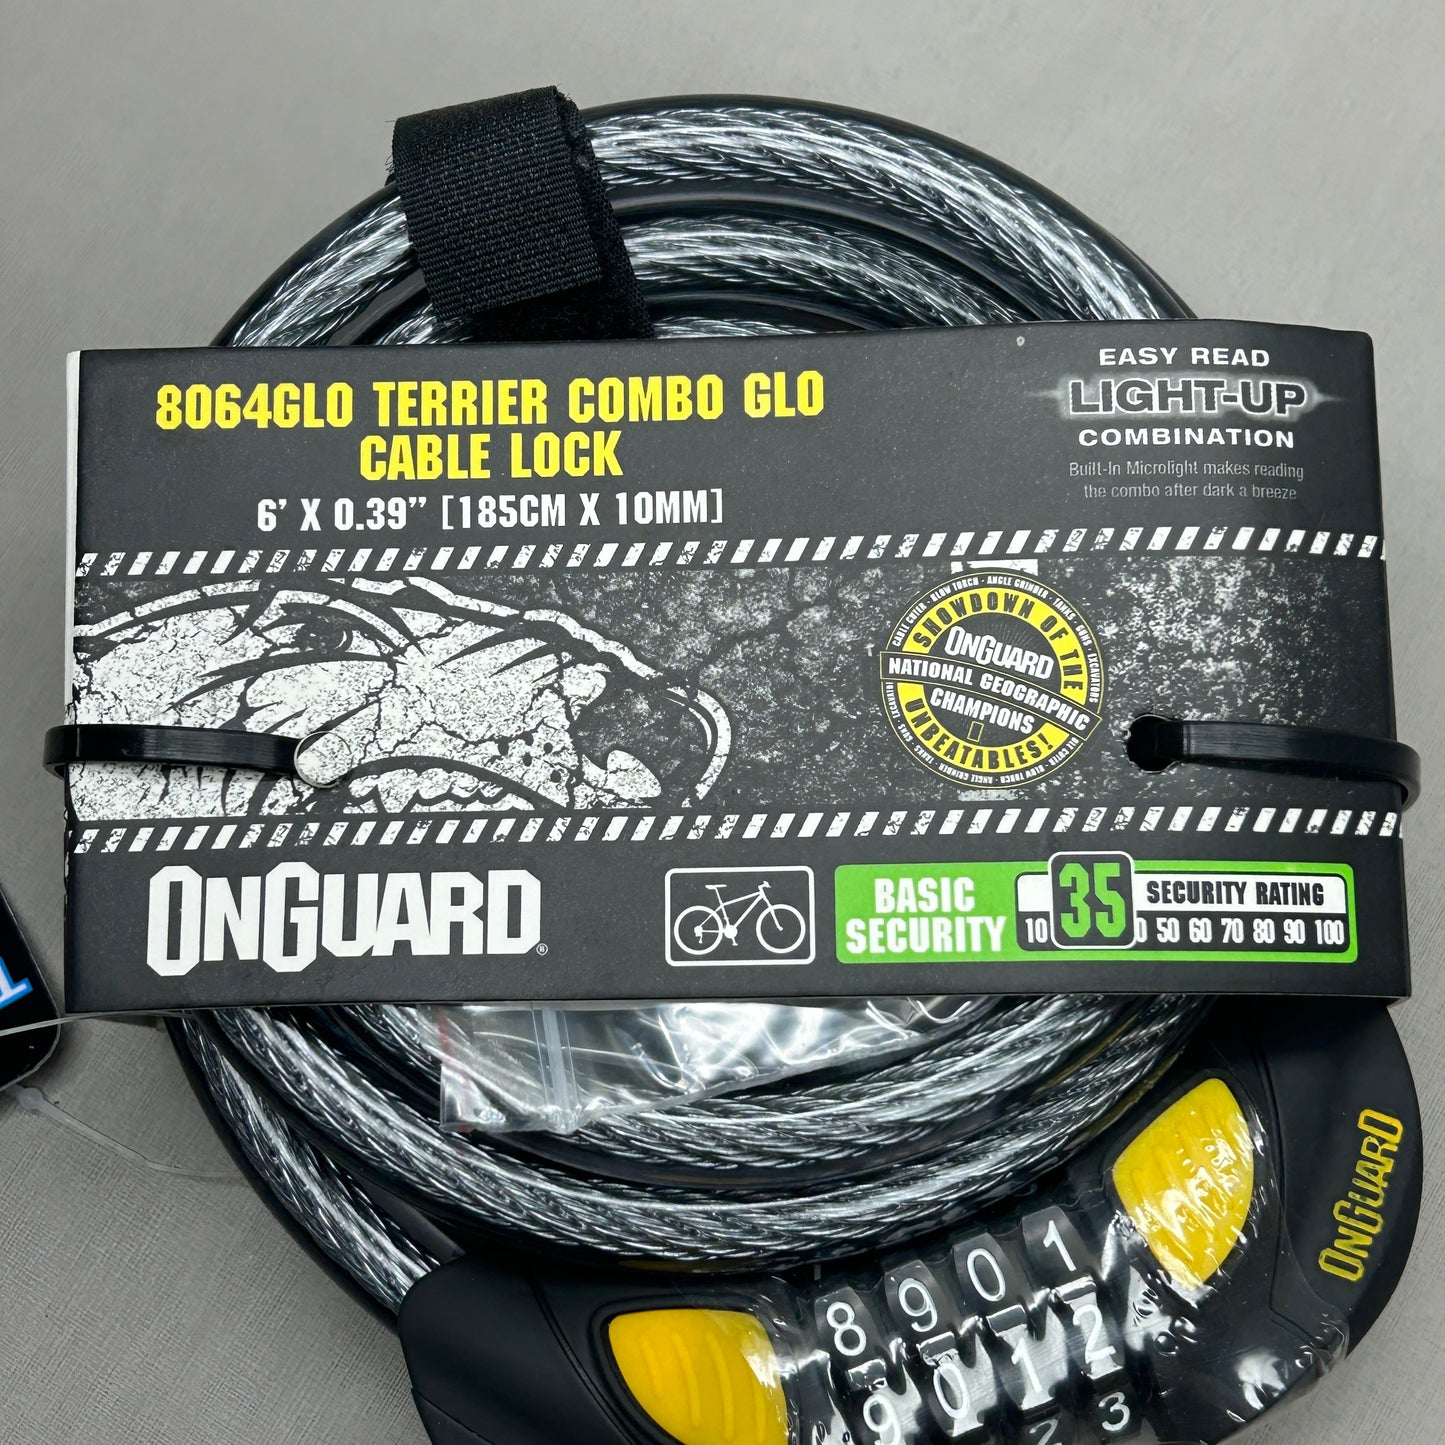 ONGUARD Terrier Combo GLO Bike Cable Lock 8064GLO (New)